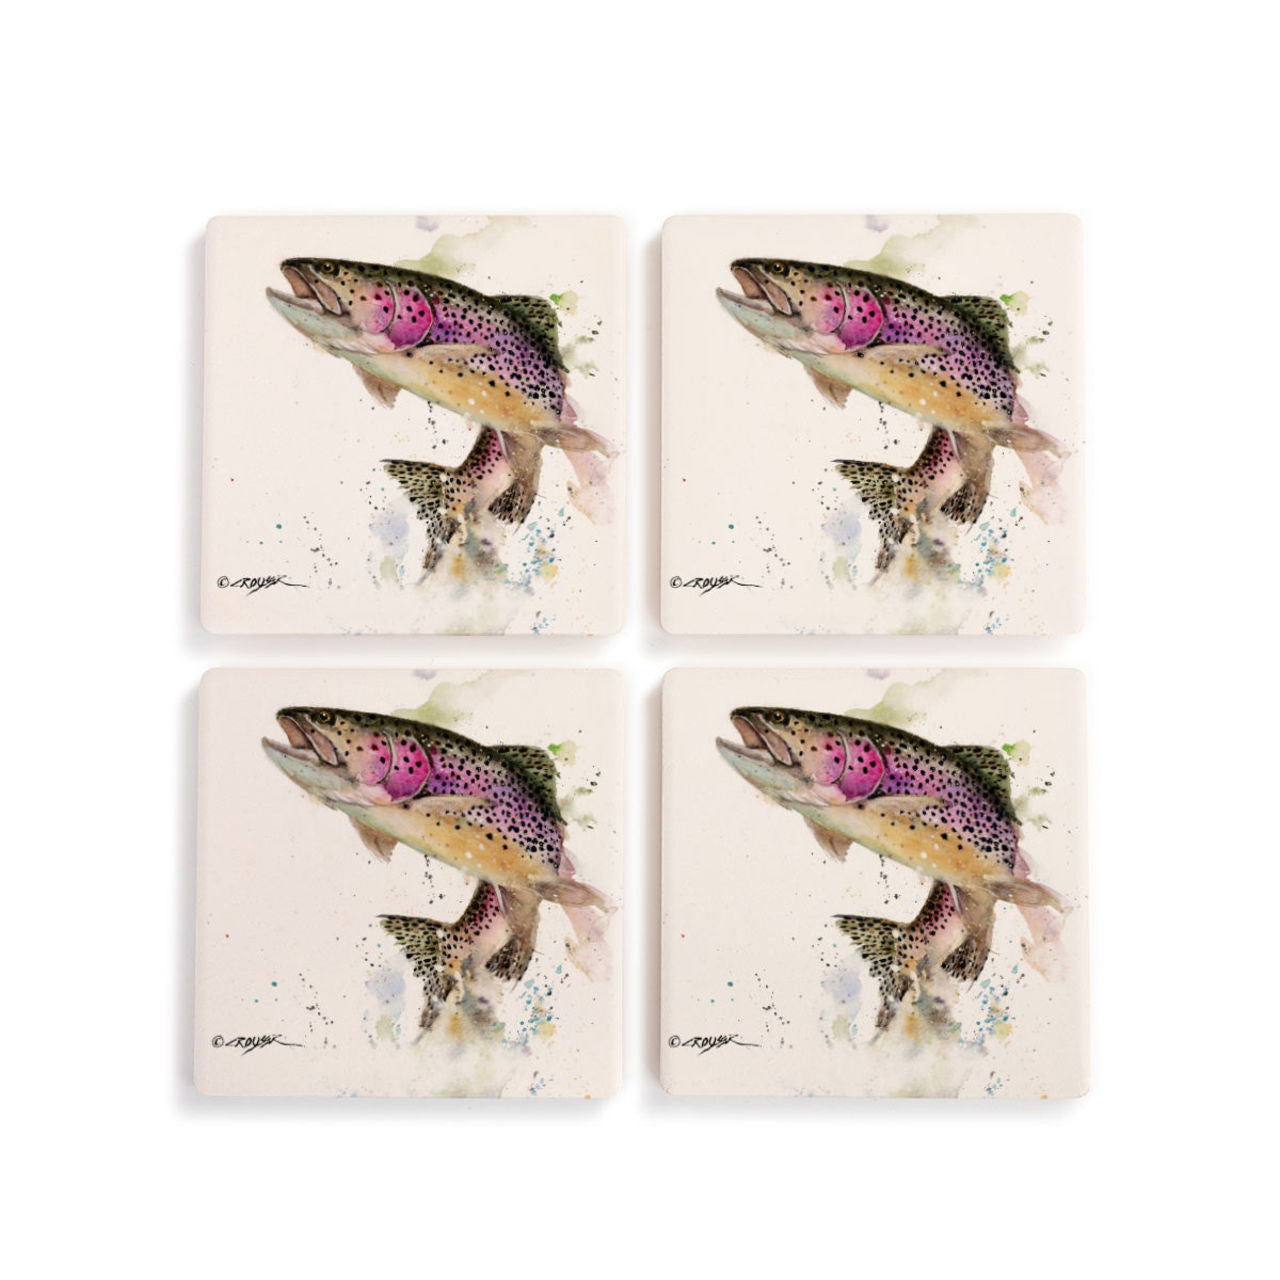 Rainbow Trout Coasters - Set of 4